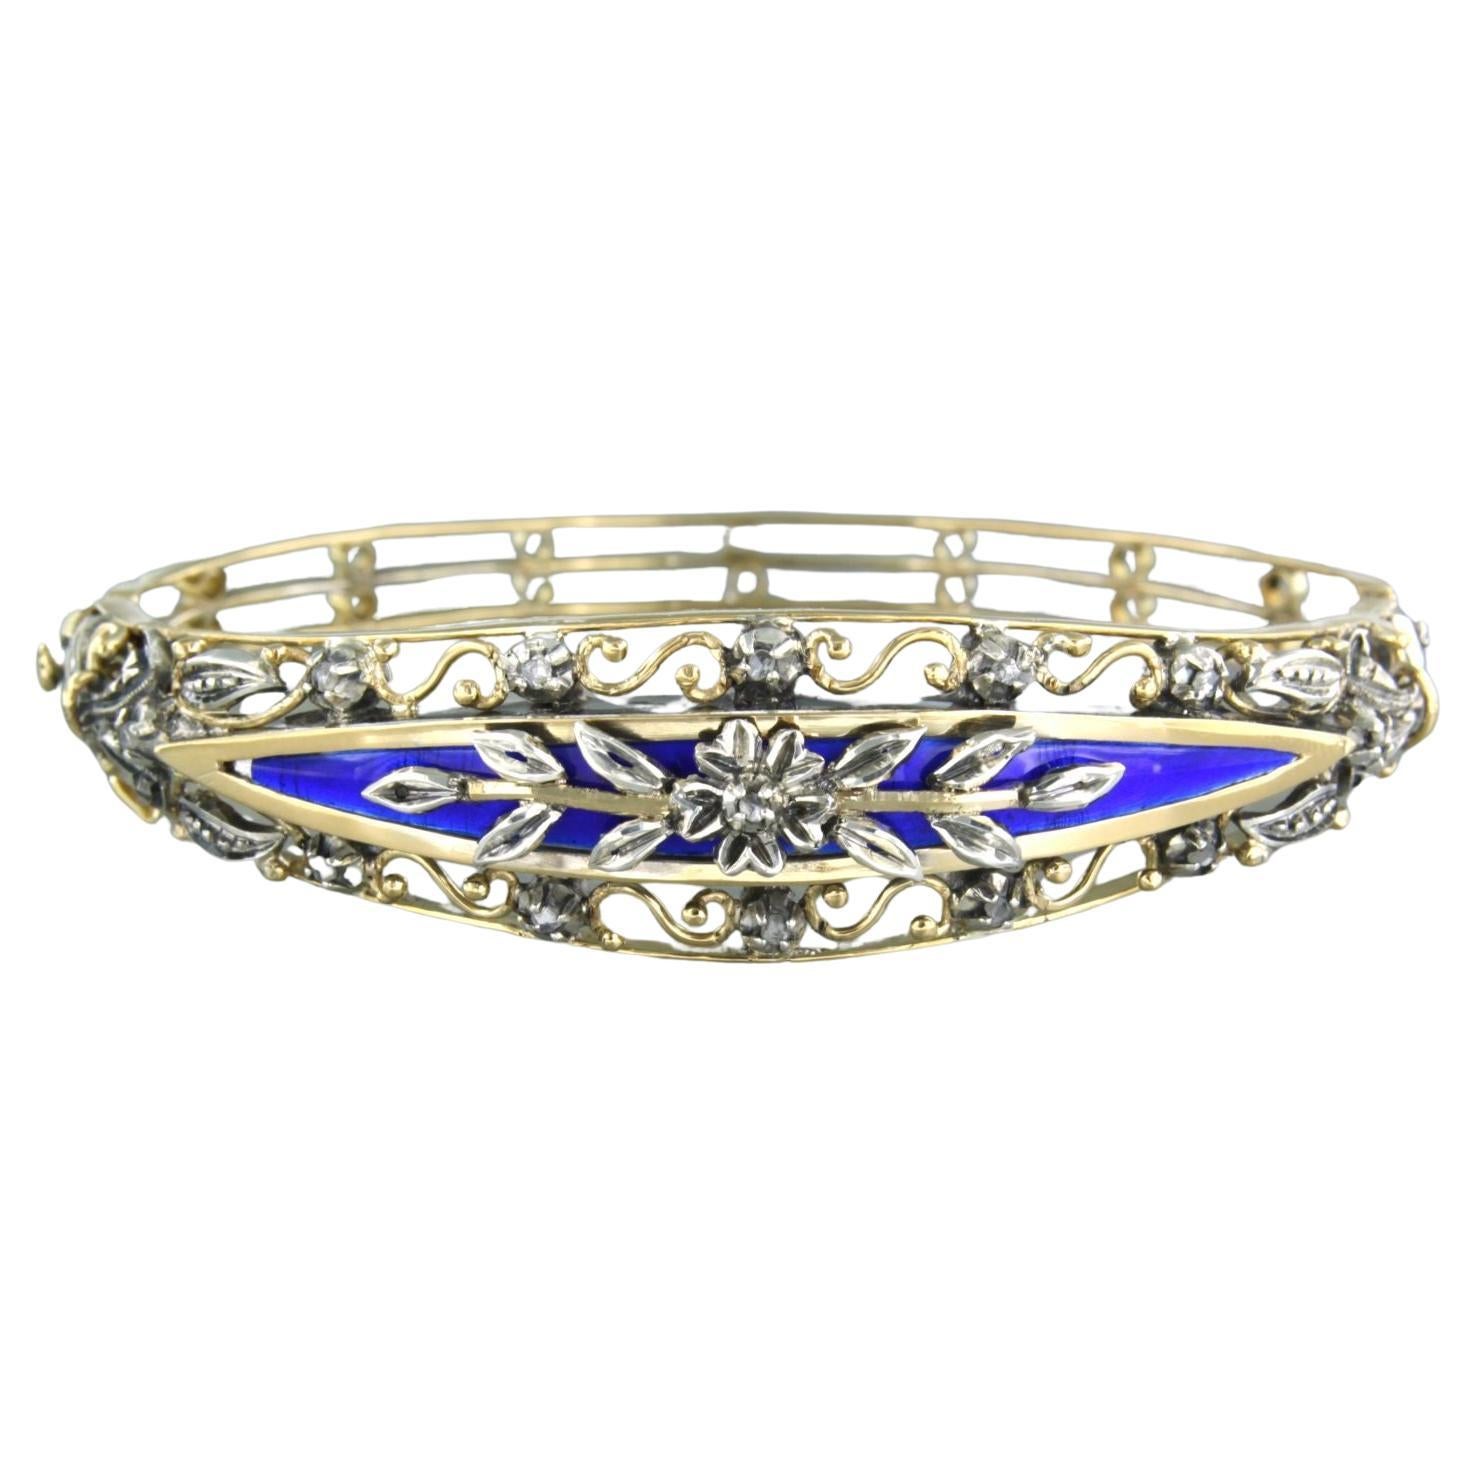 Bracelet with blue enamel and diamonds 18k gold with silver